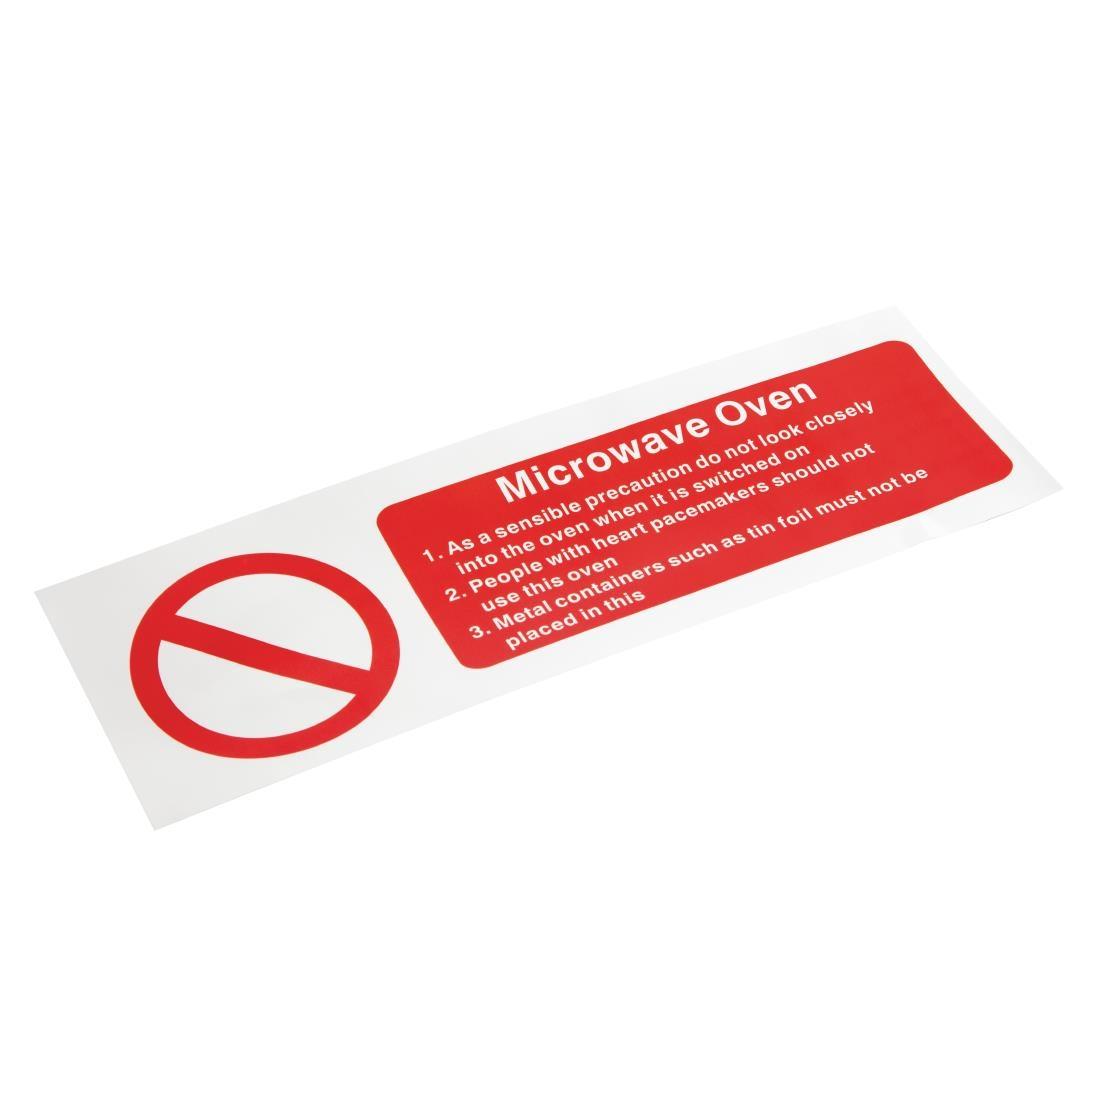 Vogue Microwave Oven Safety Sign - W231  - 1